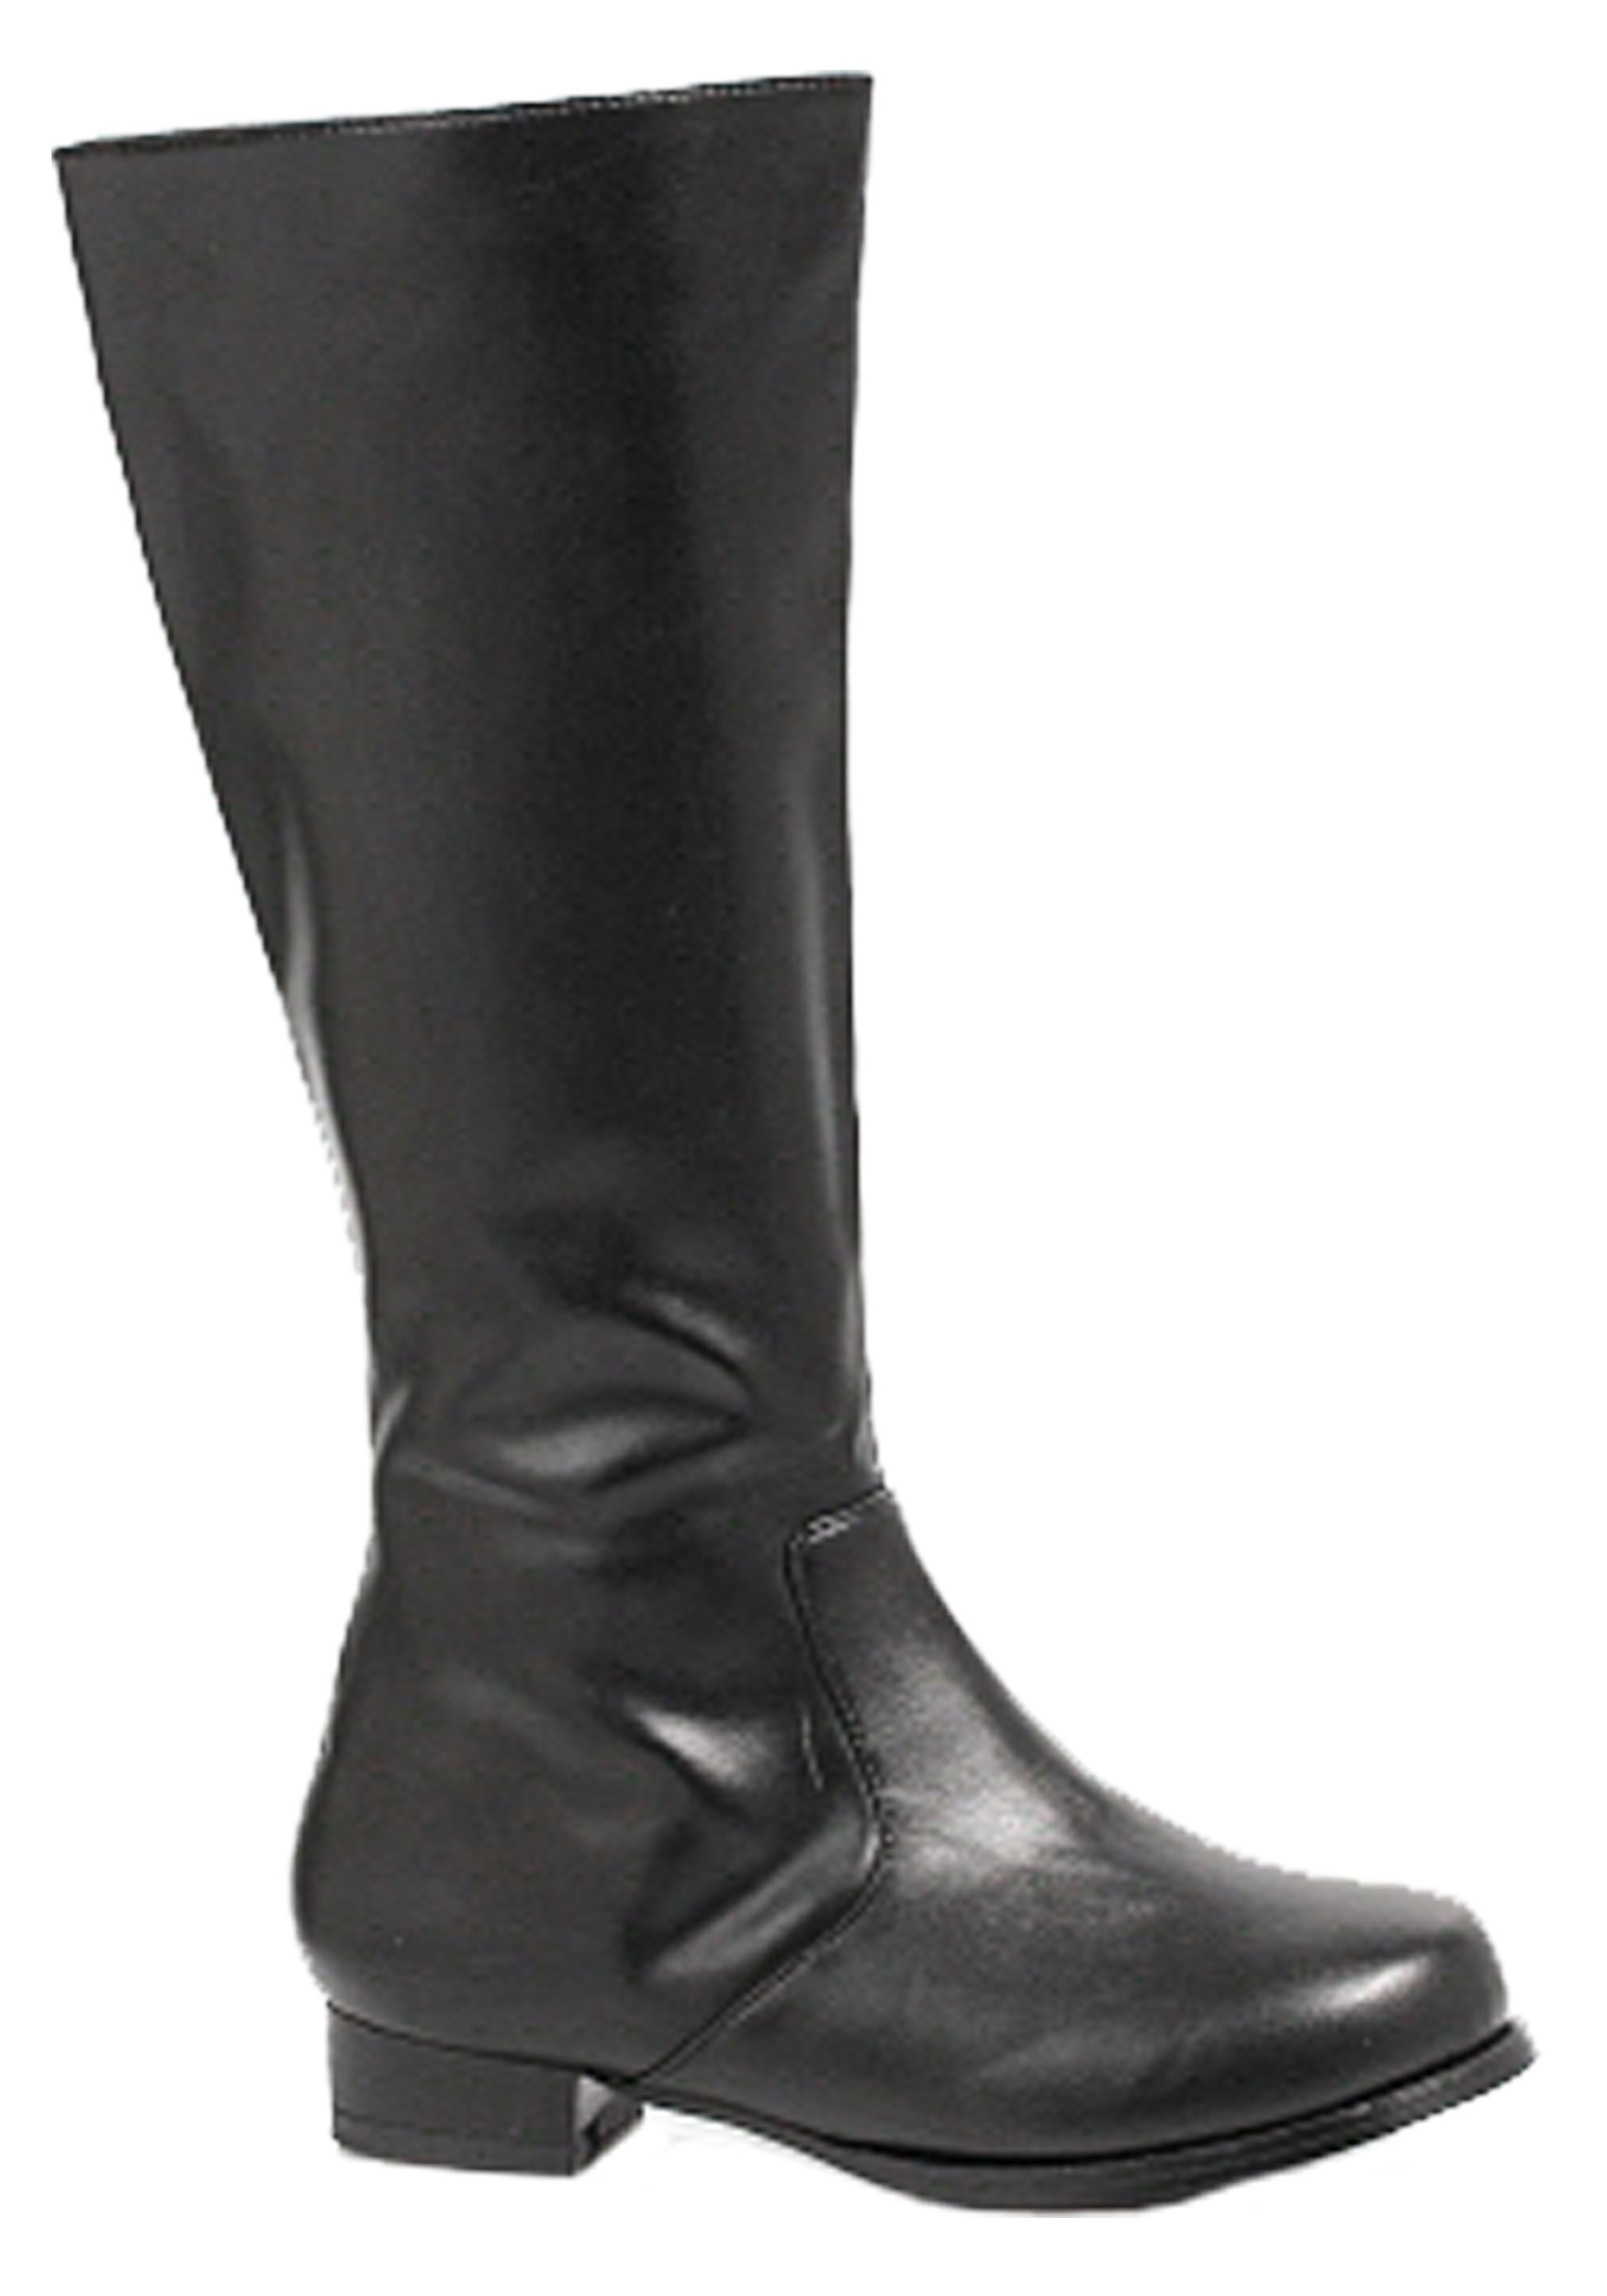 Black Costume Boots For Child